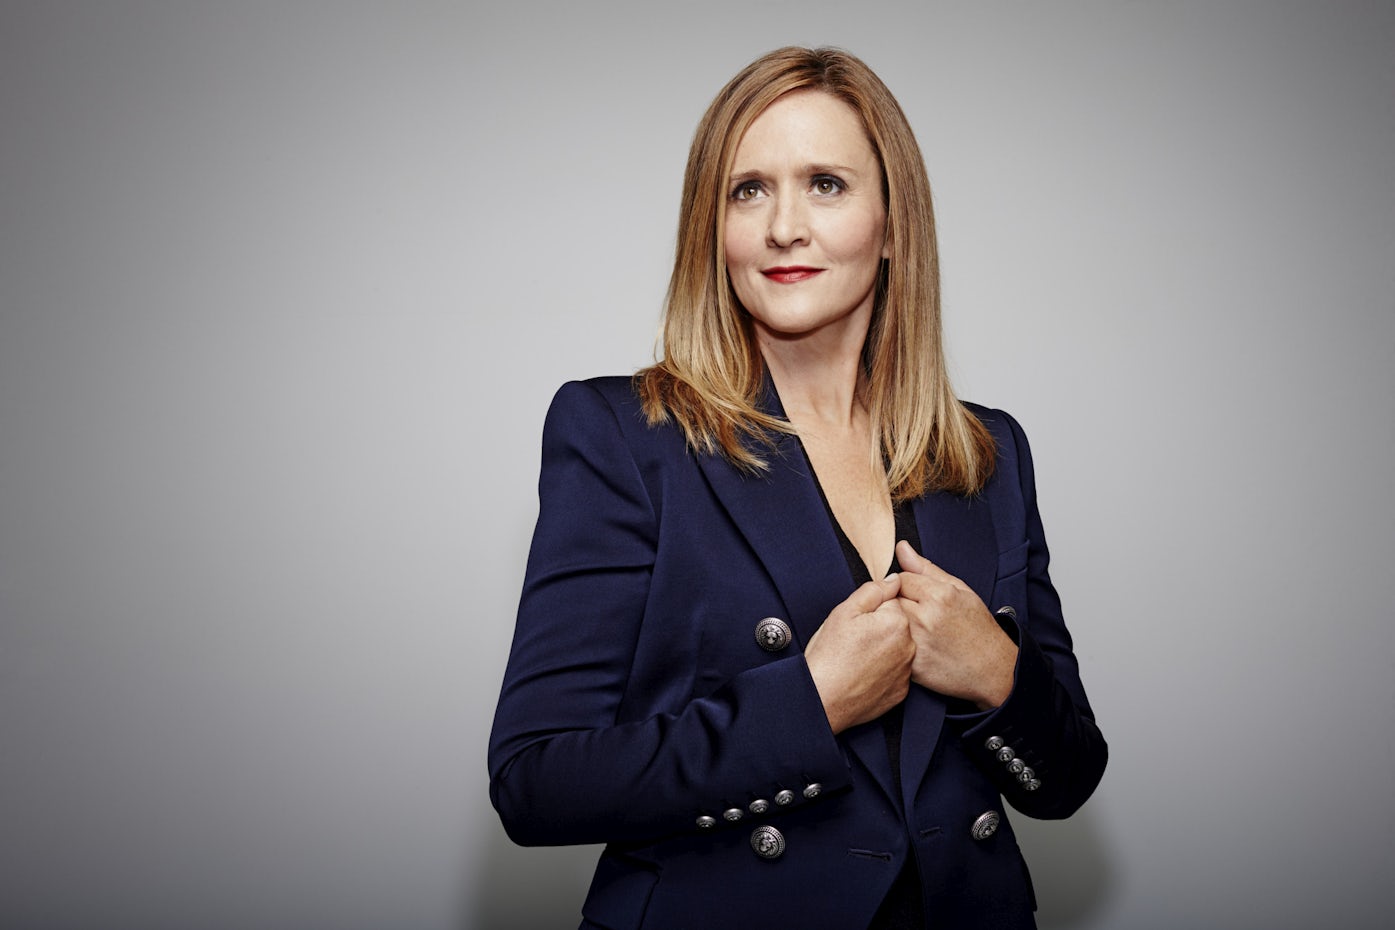 Samantha Bee Talks Conventions and Elections 'I Don't Want To Be Fully